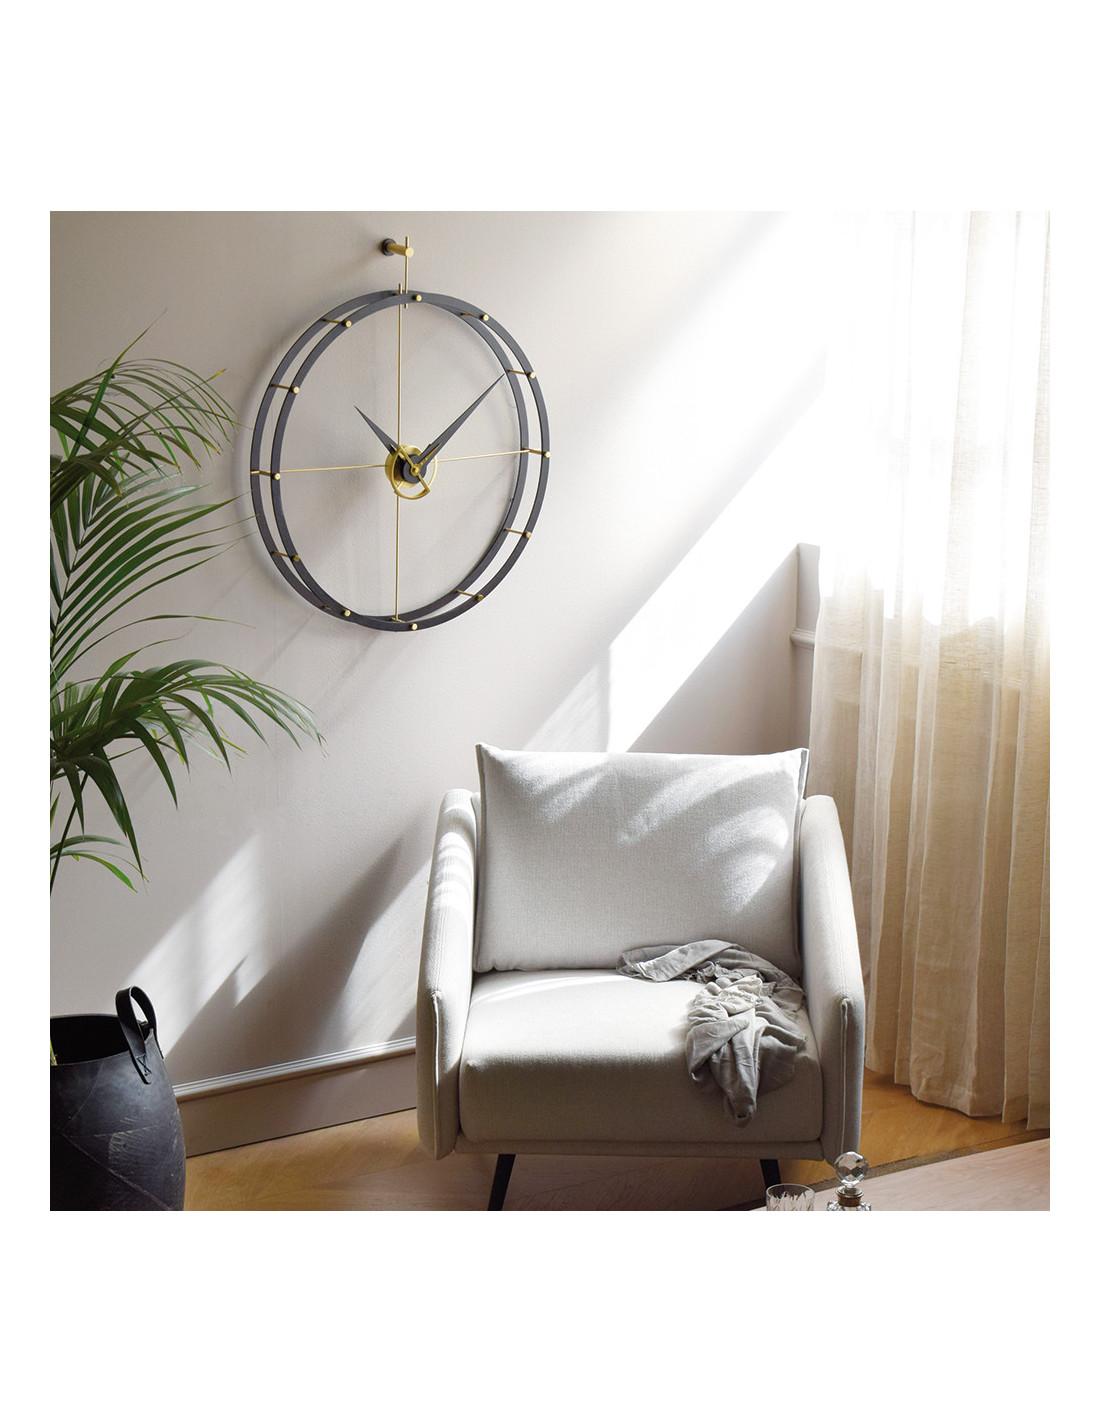 This elegant designer clock presents a diameter of 70 centimeters and a height of 80 cm that covers any space with elegance.
Doble O NG wall clock: Rings and hands in wenge wood with brass details
Not OK for Outdoor Use
Warranty: 1 year
Each